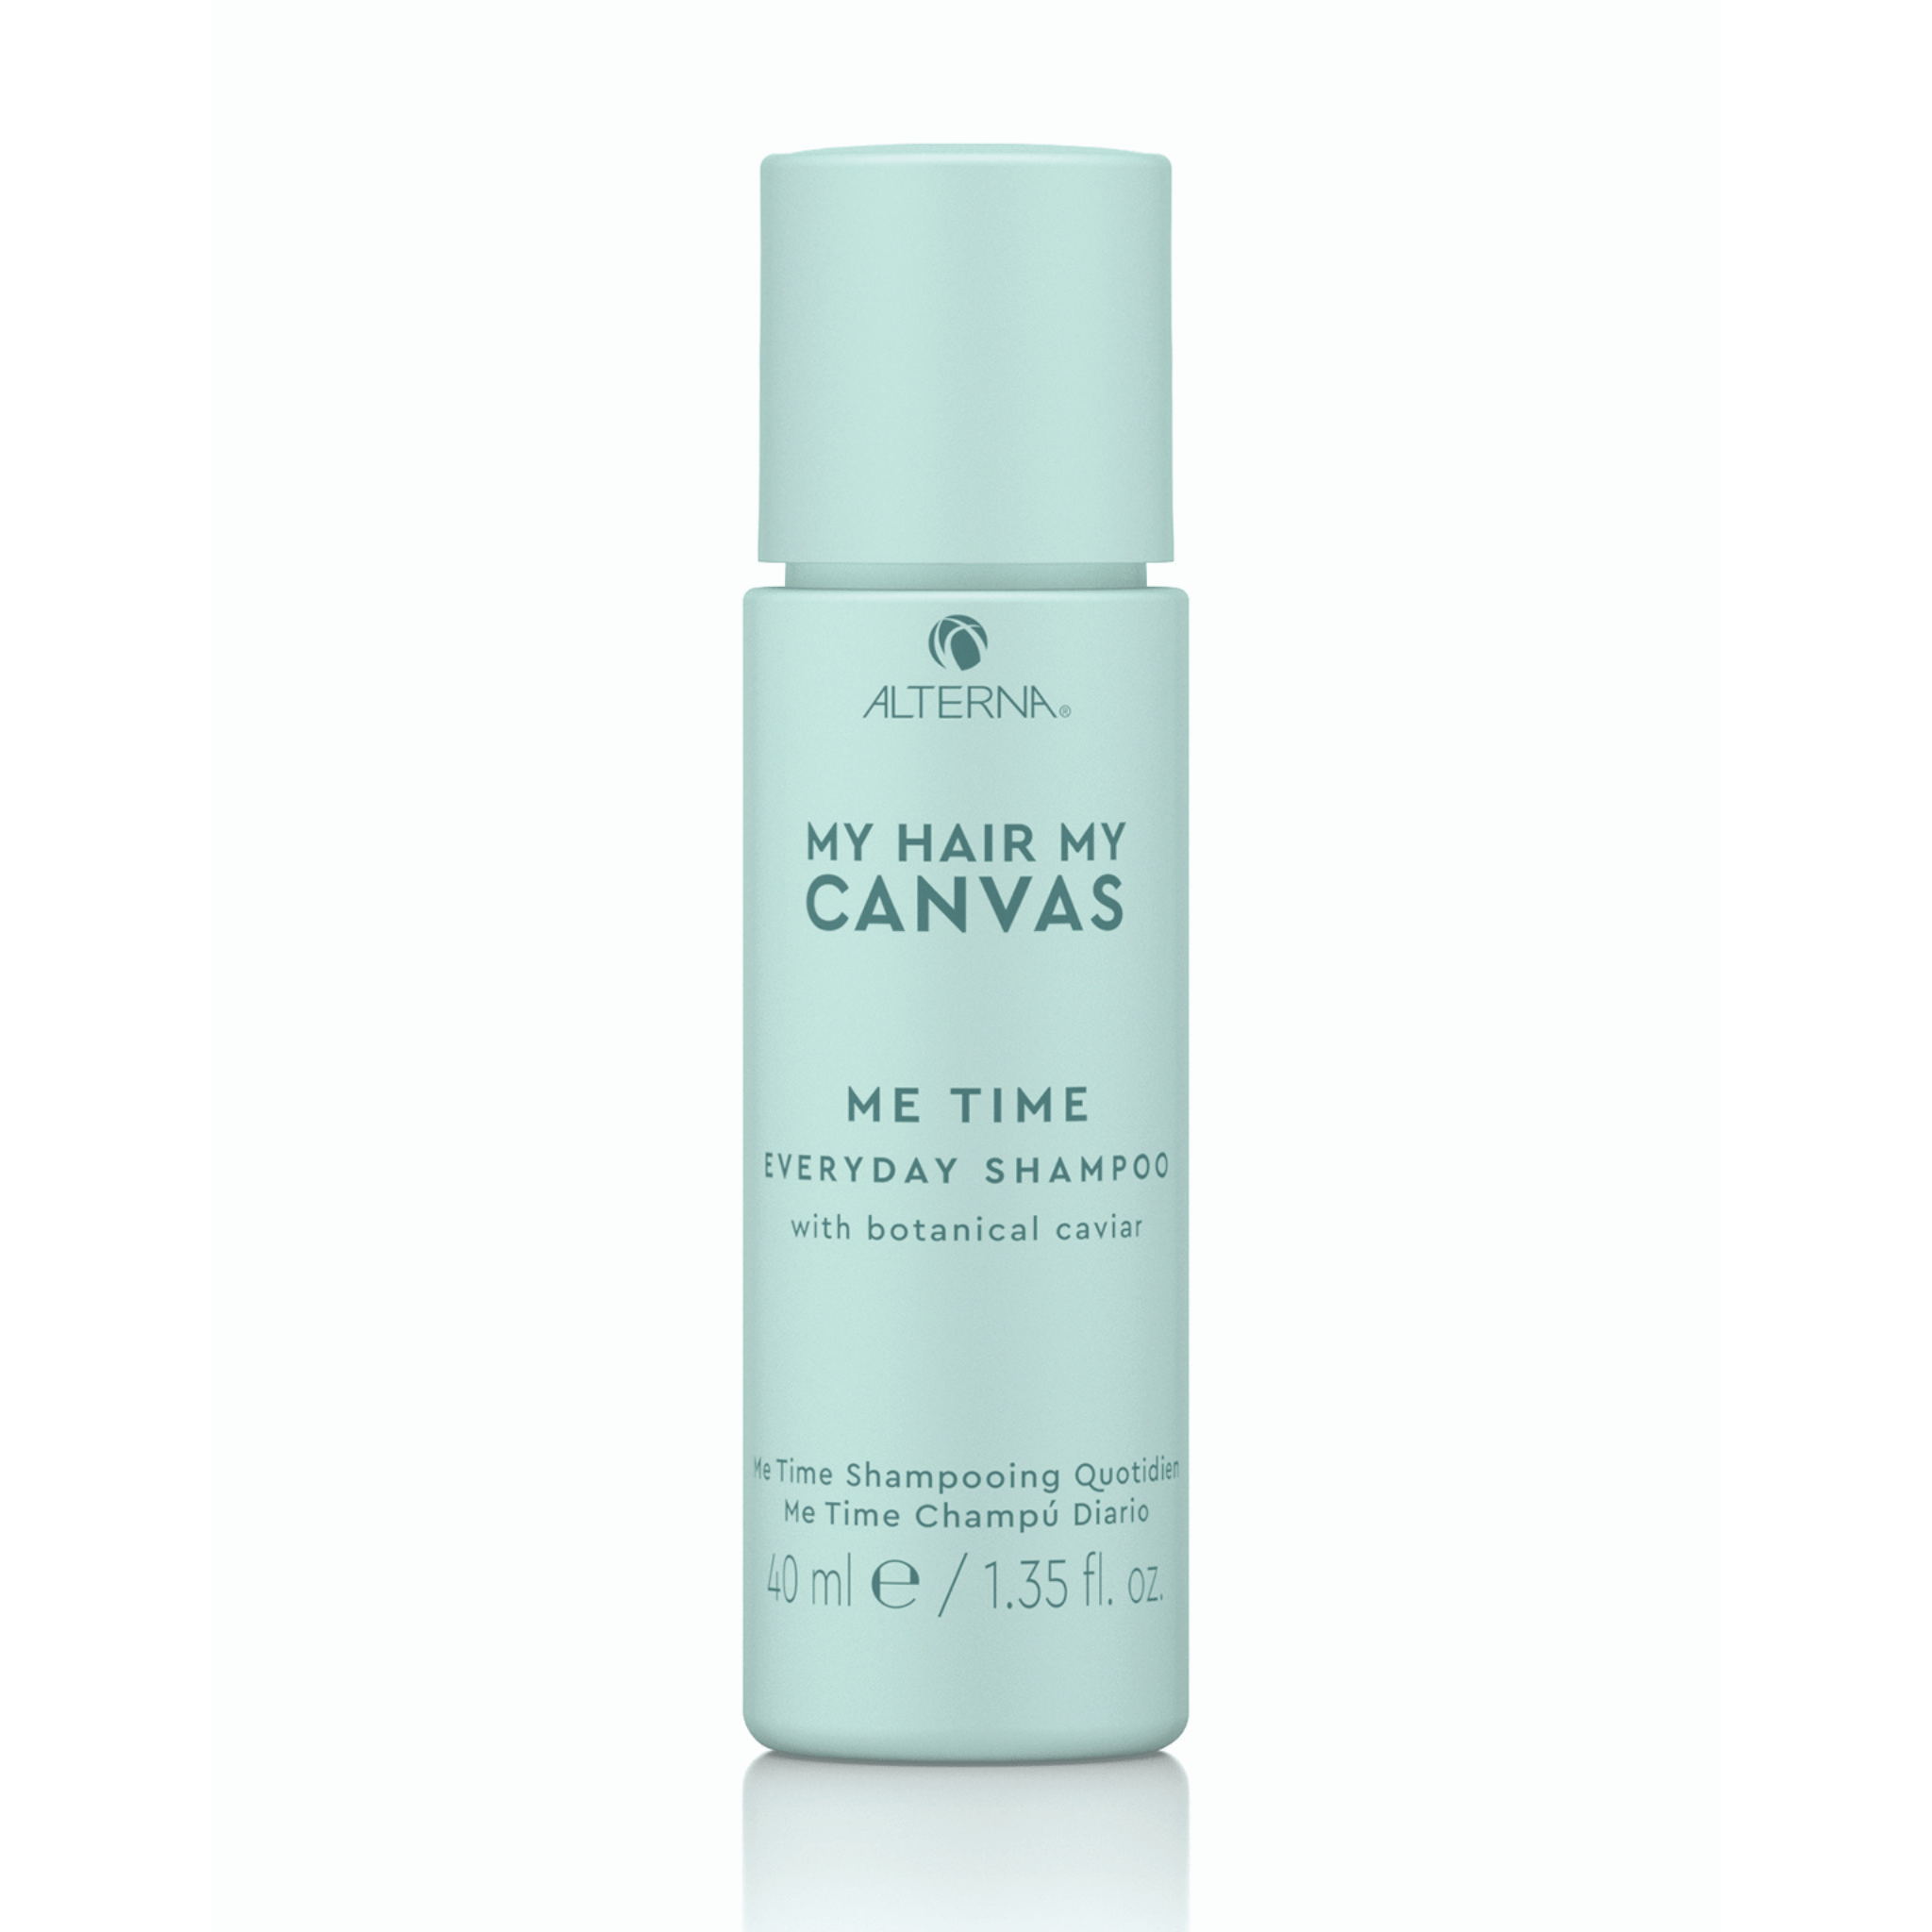 Alterna. My Hair My Canvas Shampoing Quotidien Me Time - 40 ml - Concept C. Shop